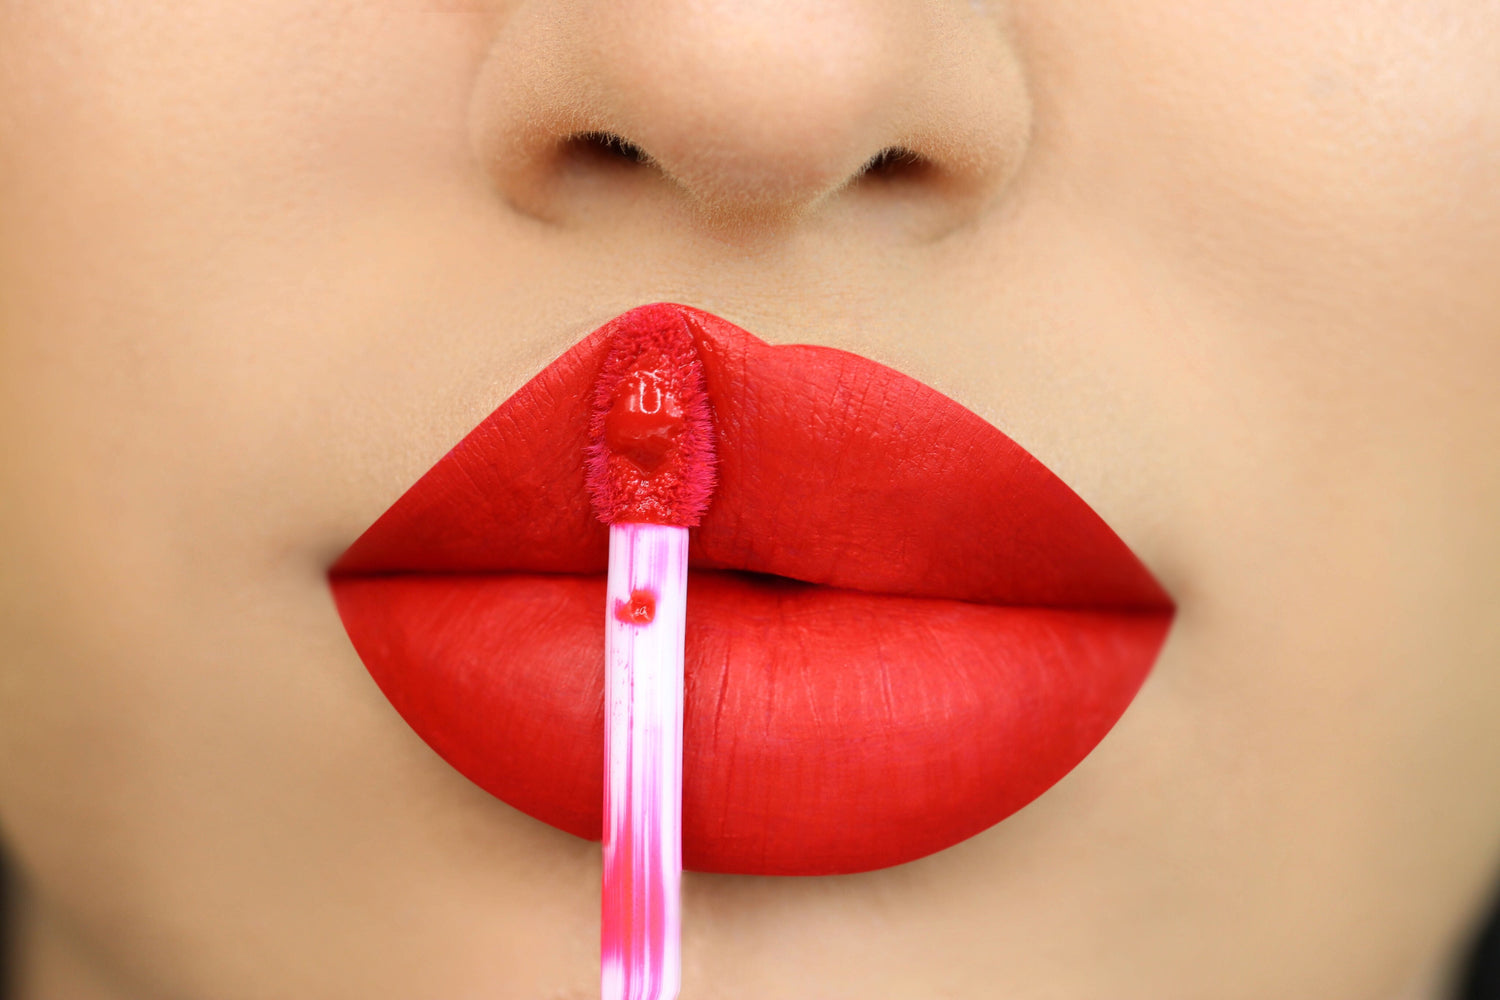 How to Wear Red Lipstick - Tips for Wearing Red Lipstick